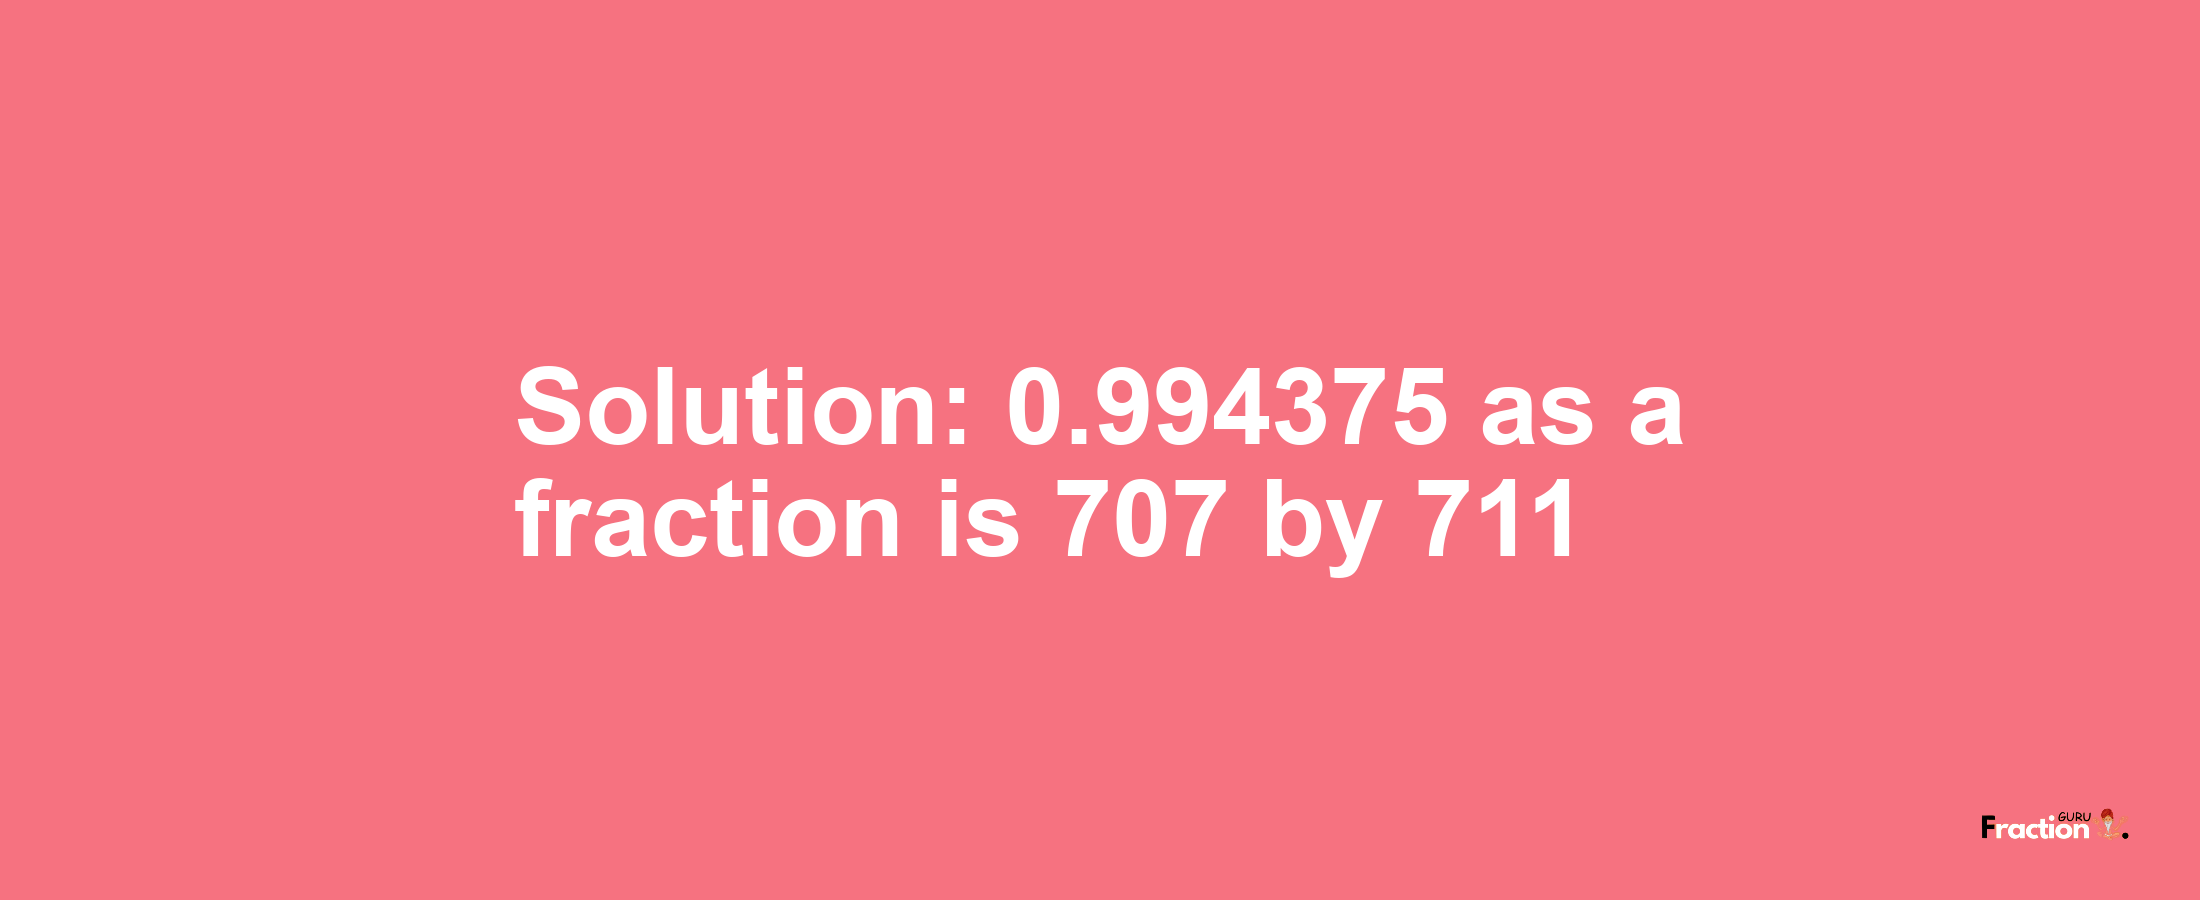 Solution:0.994375 as a fraction is 707/711